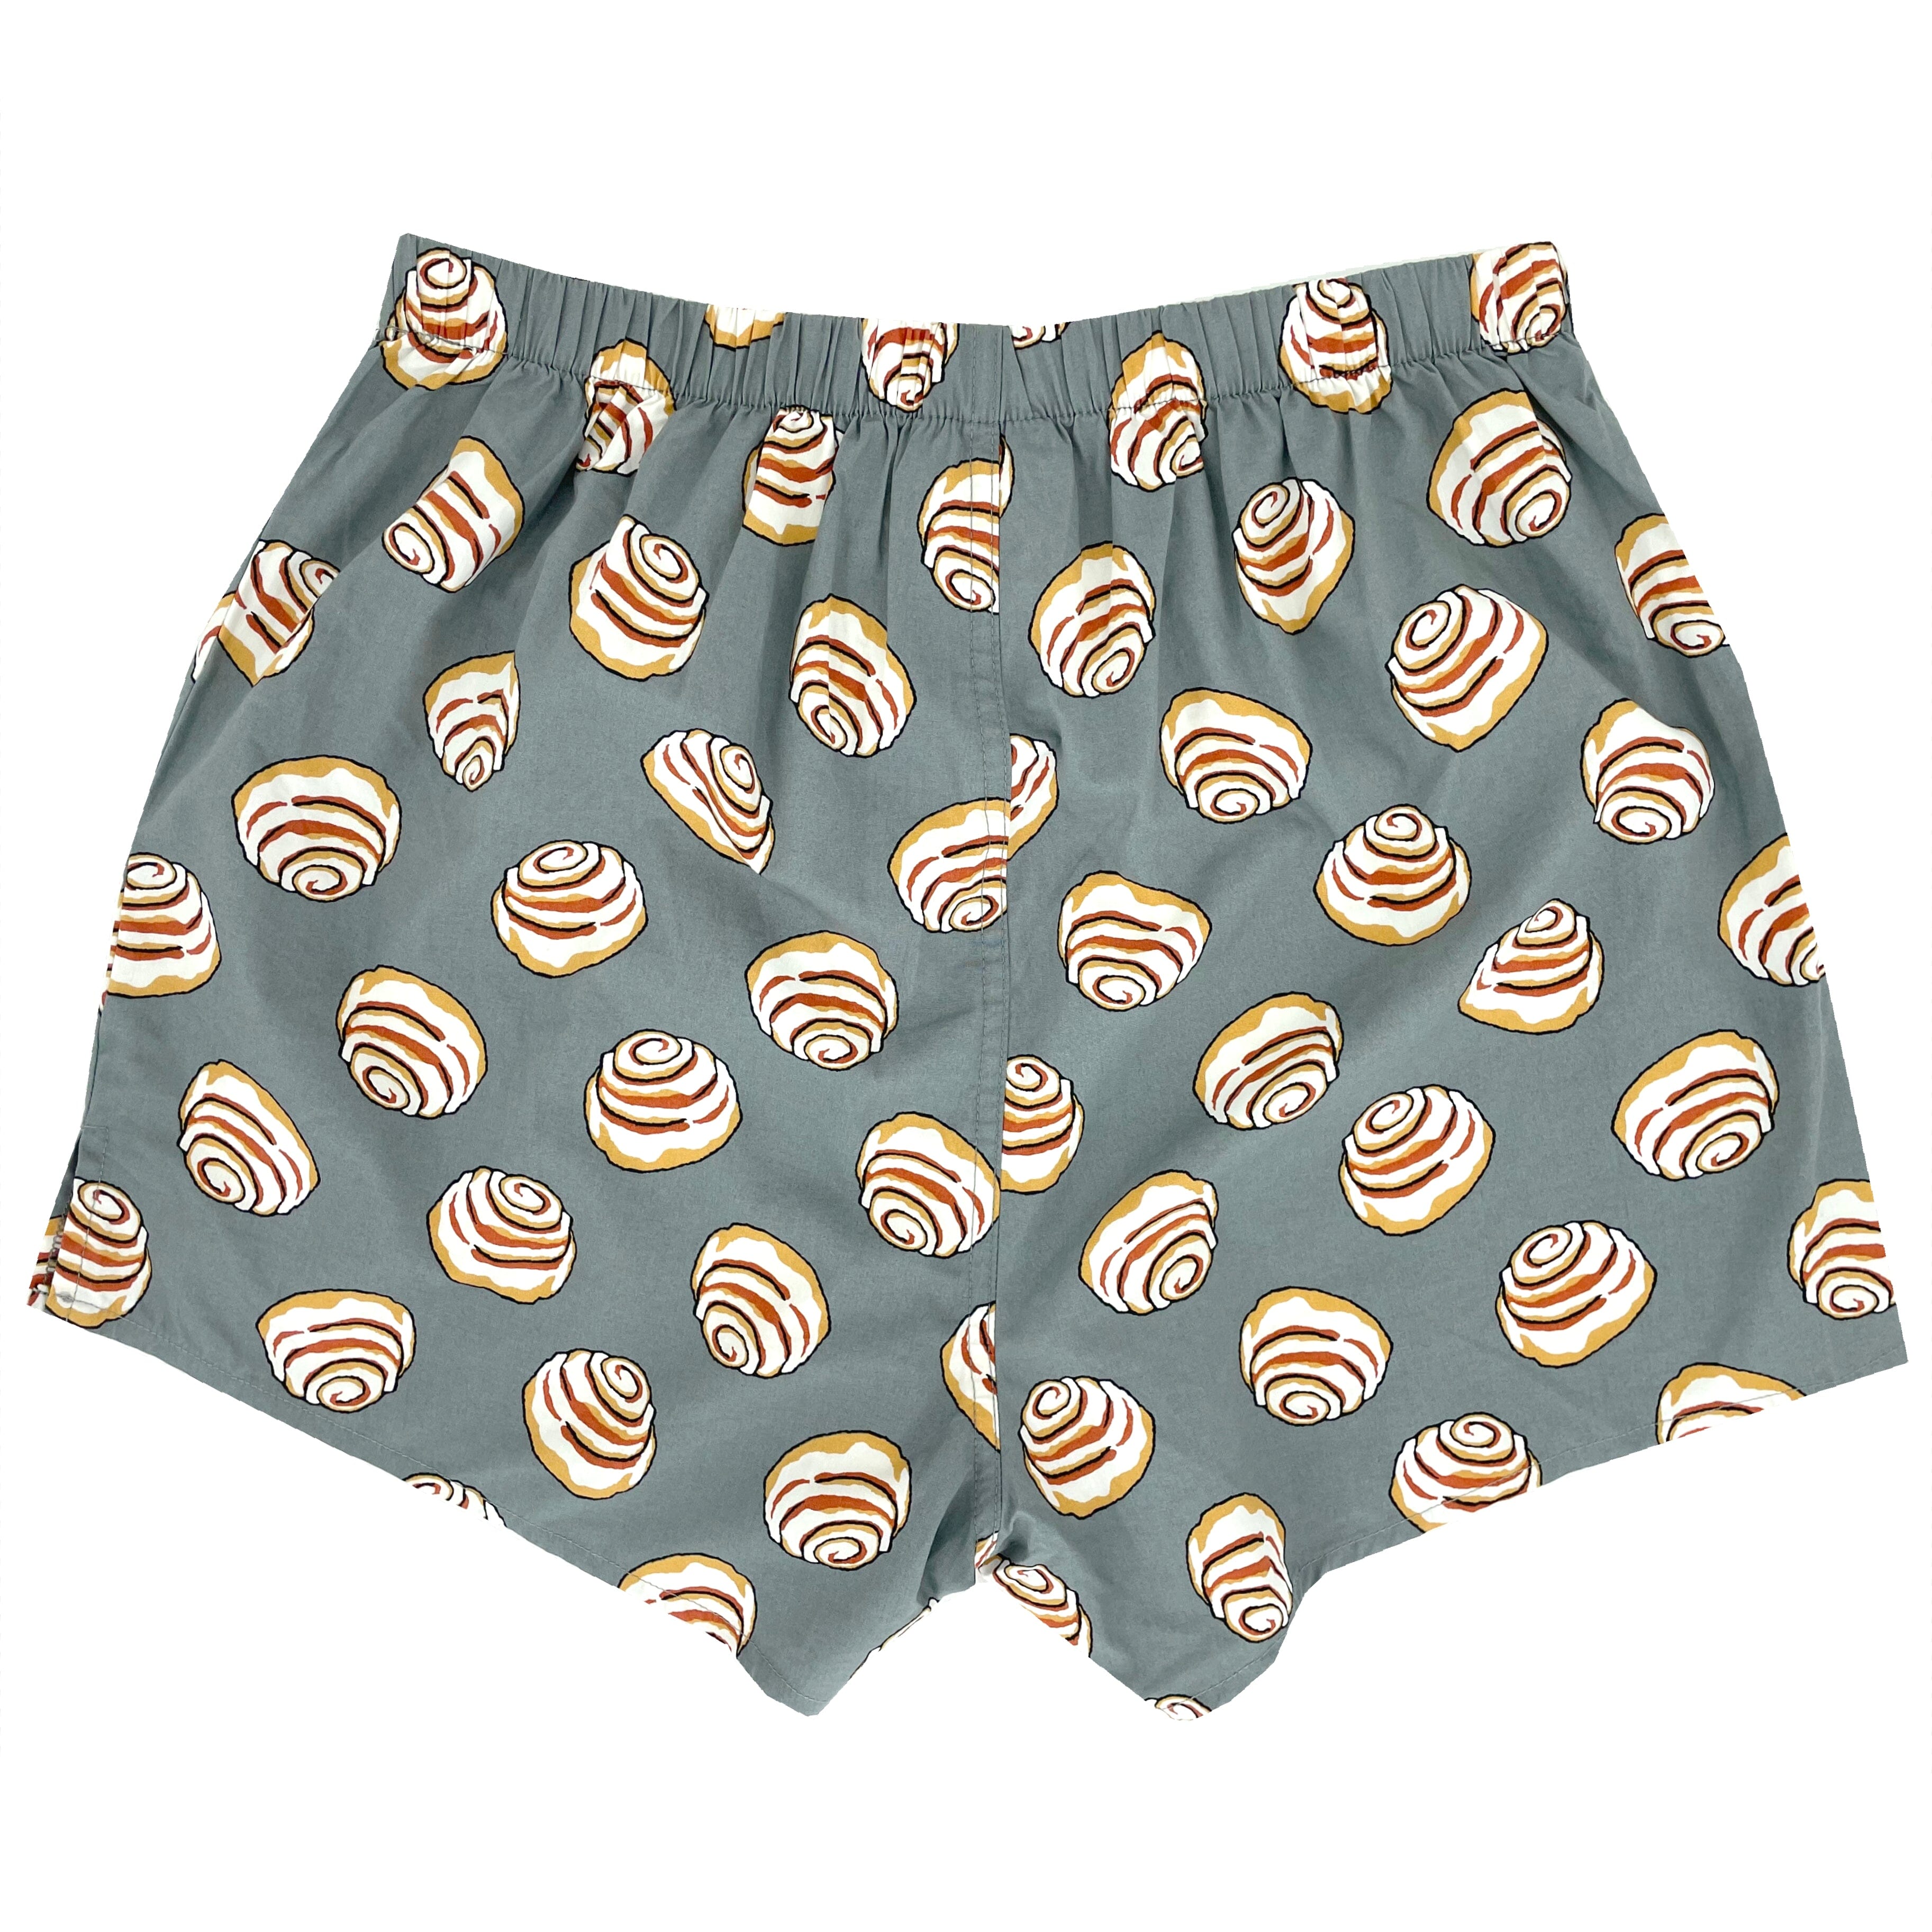 Buy Men's Food Themed Cinnamon Roll Patterned Soft Cotton Boxer Shorts